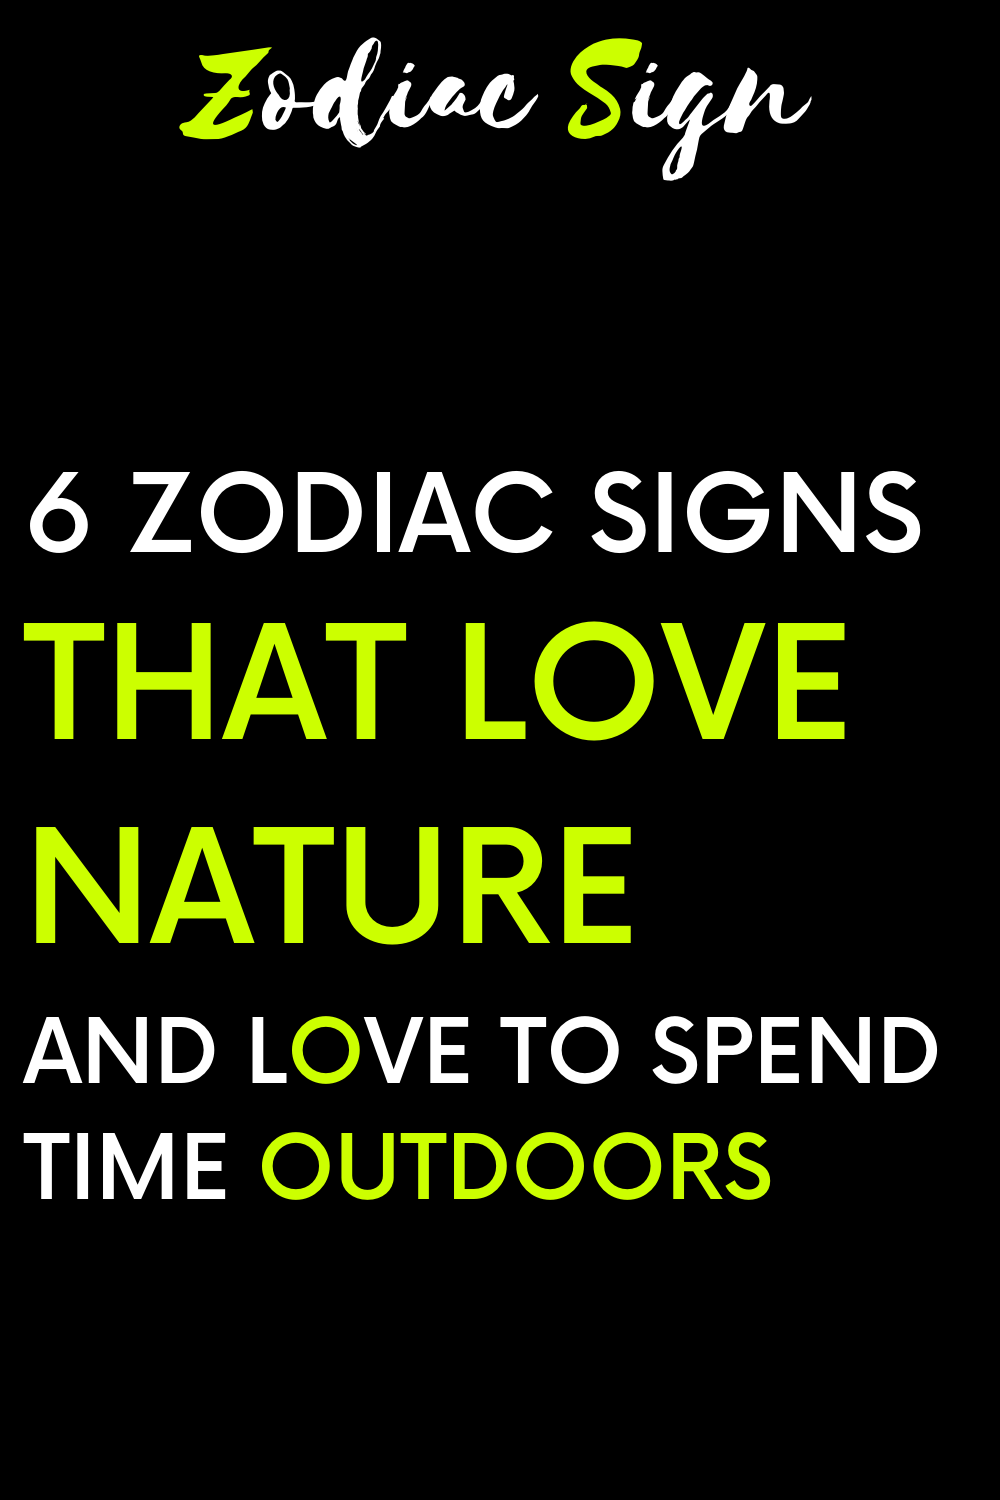 6 zodiac signs that love nature and love to spend time outdoors